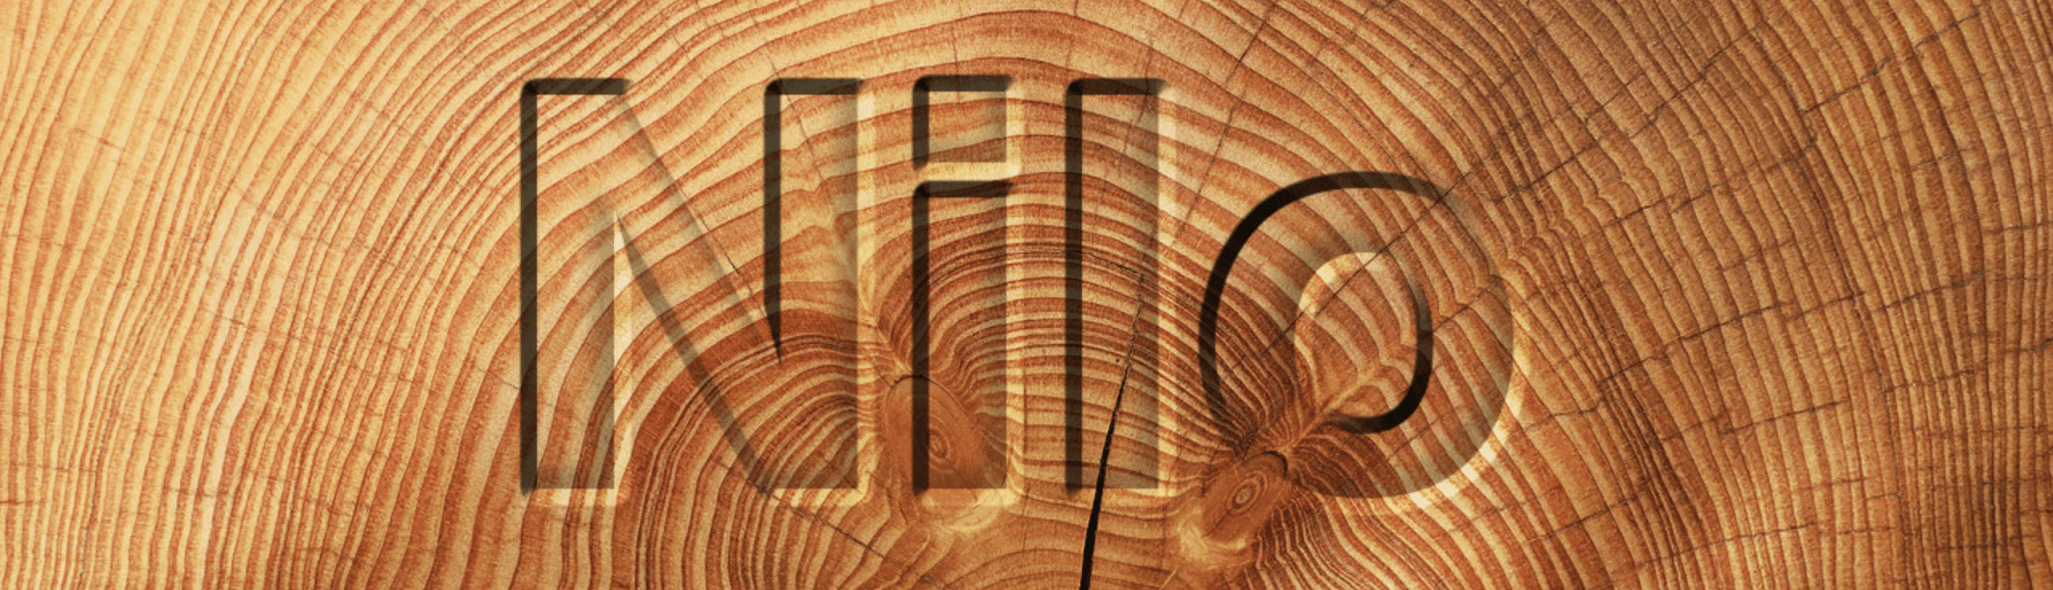 wood, wooden, log, nilo, forestry, ecology, environment